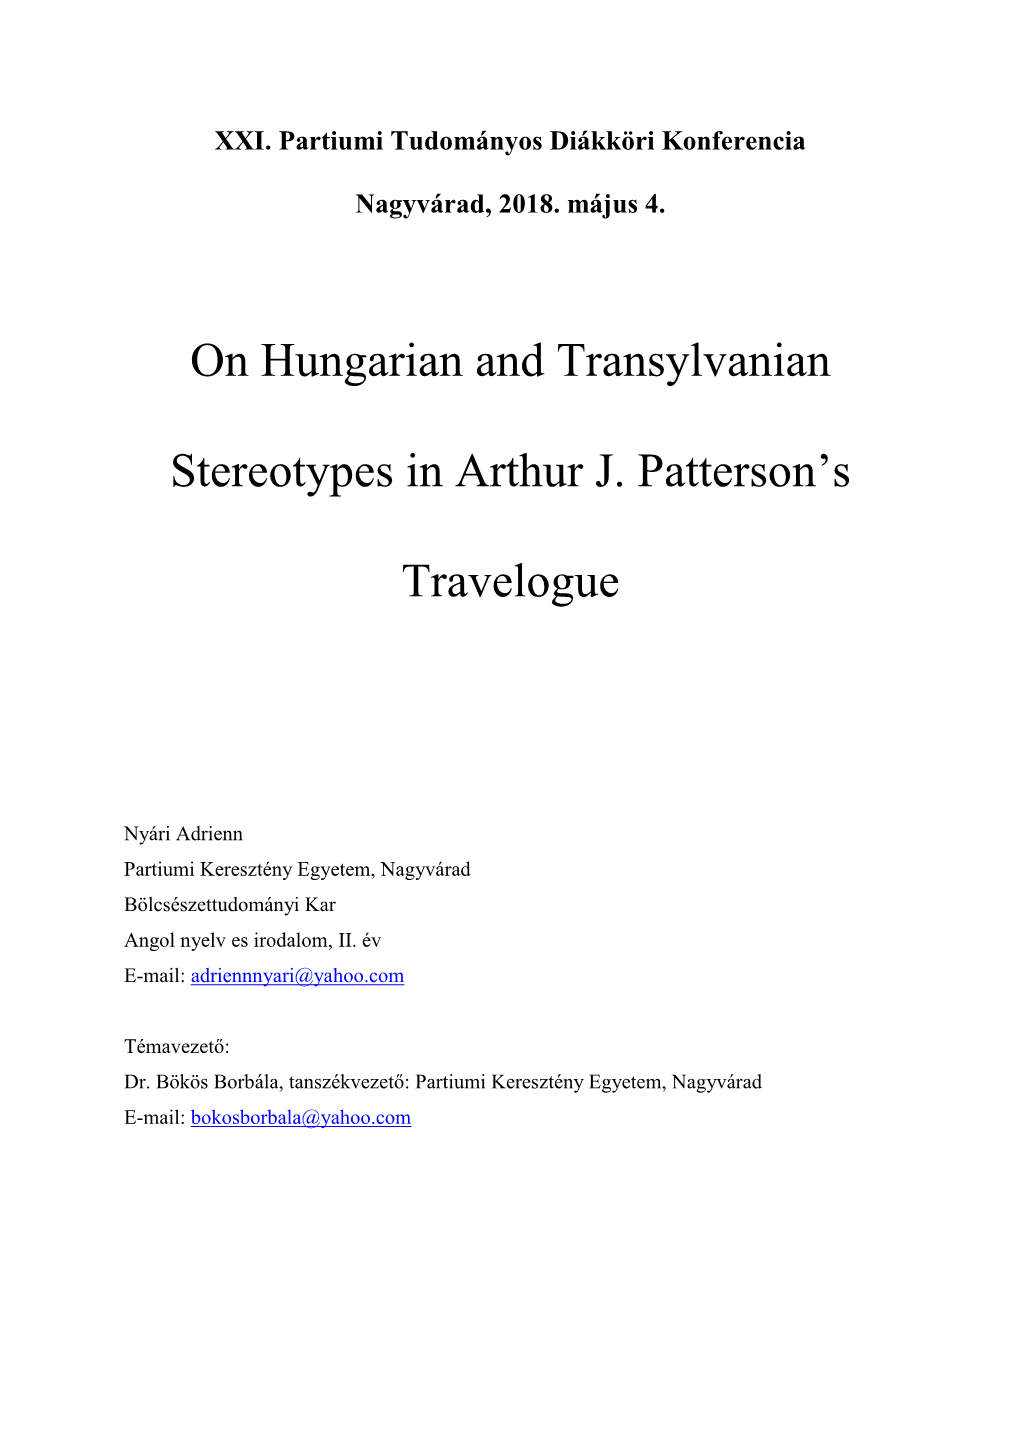 On Hungarian and Transylvanian Stereotypes in Arthur J. Patterson's Travelogue